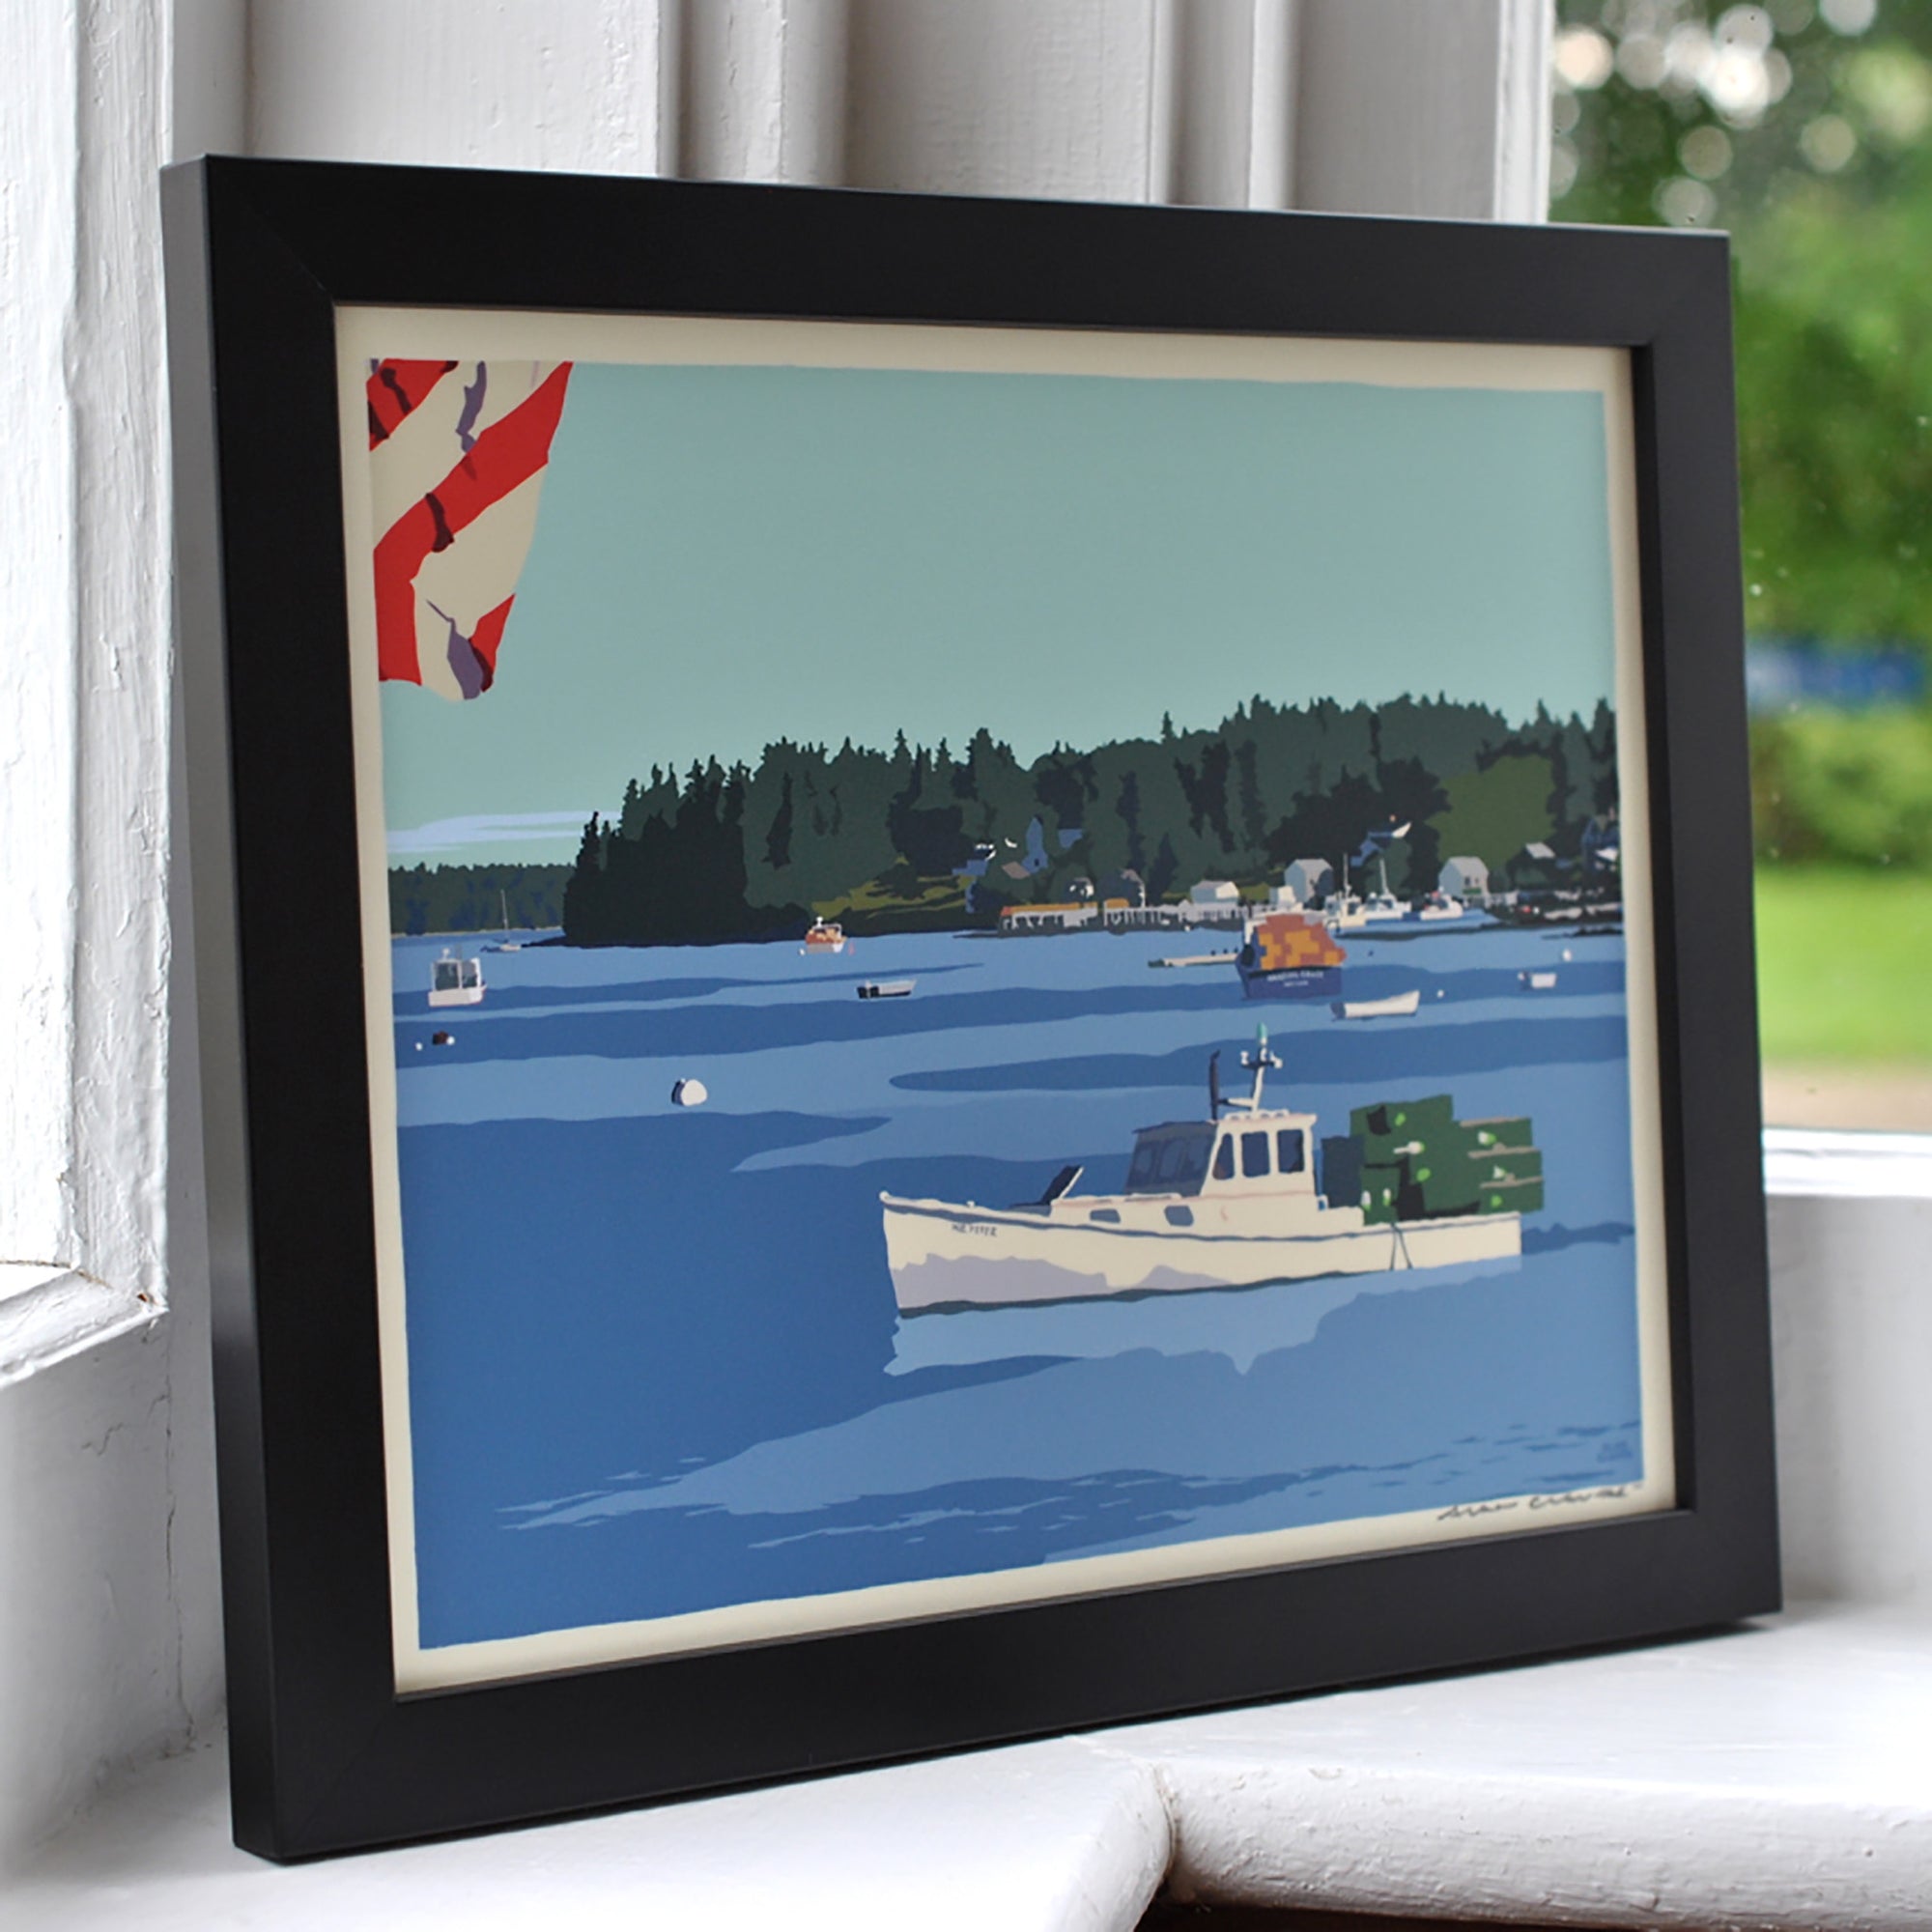 Port Clyde Lobster Boat Art Print 8" x 10" Horizontal Framed Wall Poster- Maine